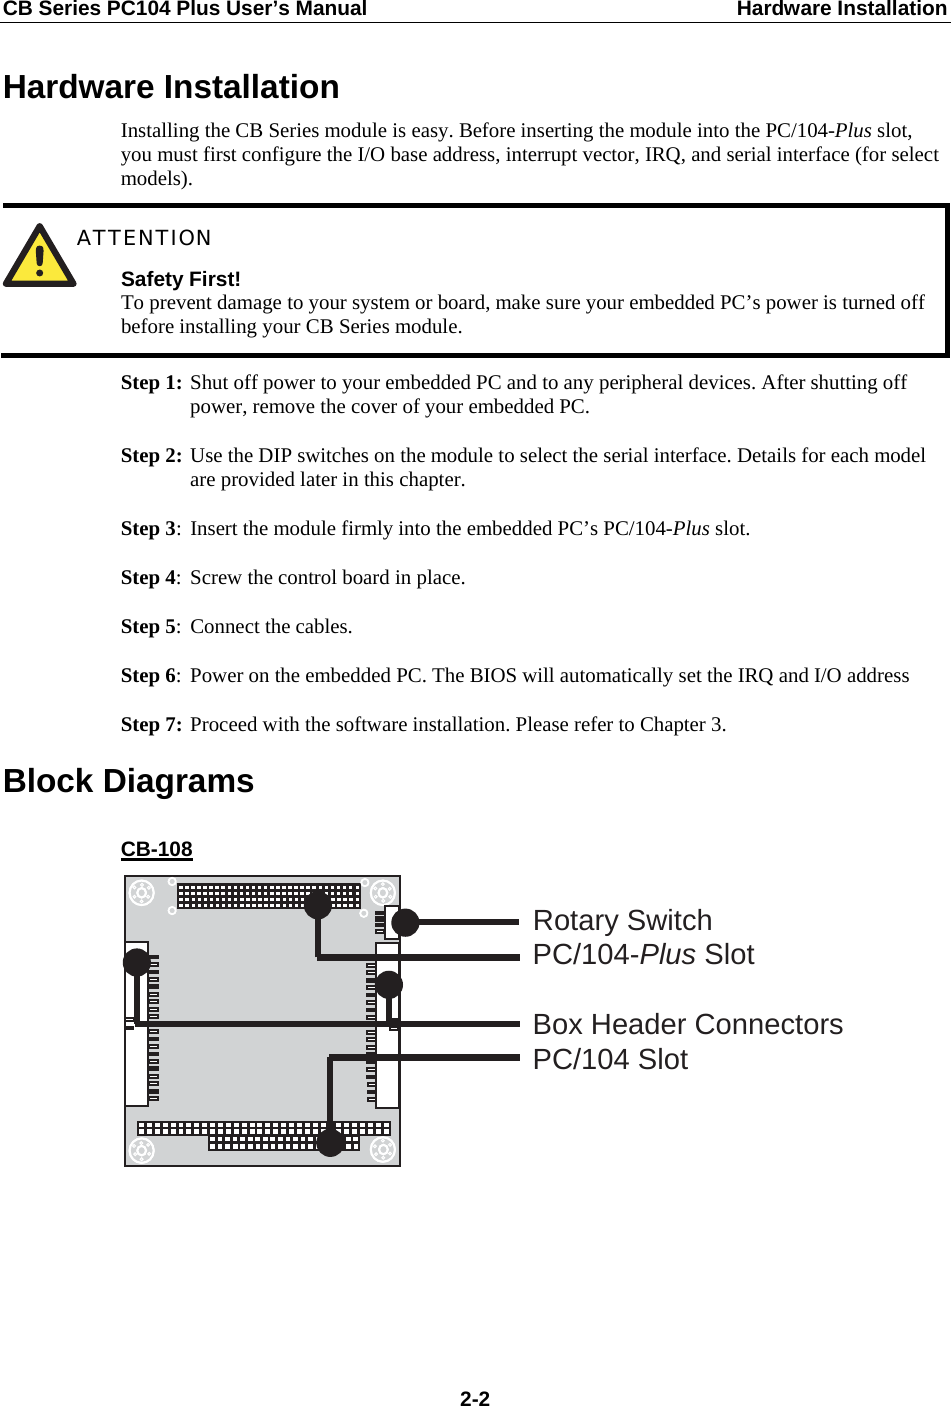 CB Series PC104 Plus User’s Manual  Hardware Installation Hardware Installation Installing the CB Series module is easy. Before inserting the module into the PC/104-Plus slot, you must first configure the I/O base address, interrupt vector, IRQ, and serial interface (for select models).  ATTENTION Safety First! To prevent damage to your system or board, make sure your embedded PC’s power is turned off before installing your CB Series module. Step 1: Shut off power to your embedded PC and to any peripheral devices. After shutting off power, remove the cover of your embedded PC. Step 2: Use the DIP switches on the module to select the serial interface. Details for each model are provided later in this chapter. Step 3: Insert the module firmly into the embedded PC’s PC/104-Plus slot. Step 4: Screw the control board in place. Step 5:  Connect the cables. Step 6:  Power on the embedded PC. The BIOS will automatically set the IRQ and I/O address Step 7: Proceed with the software installation. Please refer to Chapter 3. Block Diagrams CB-108 PC/104-Plus SlotBox Header ConnectorsPC/104 SlotRotary Switch       2-2